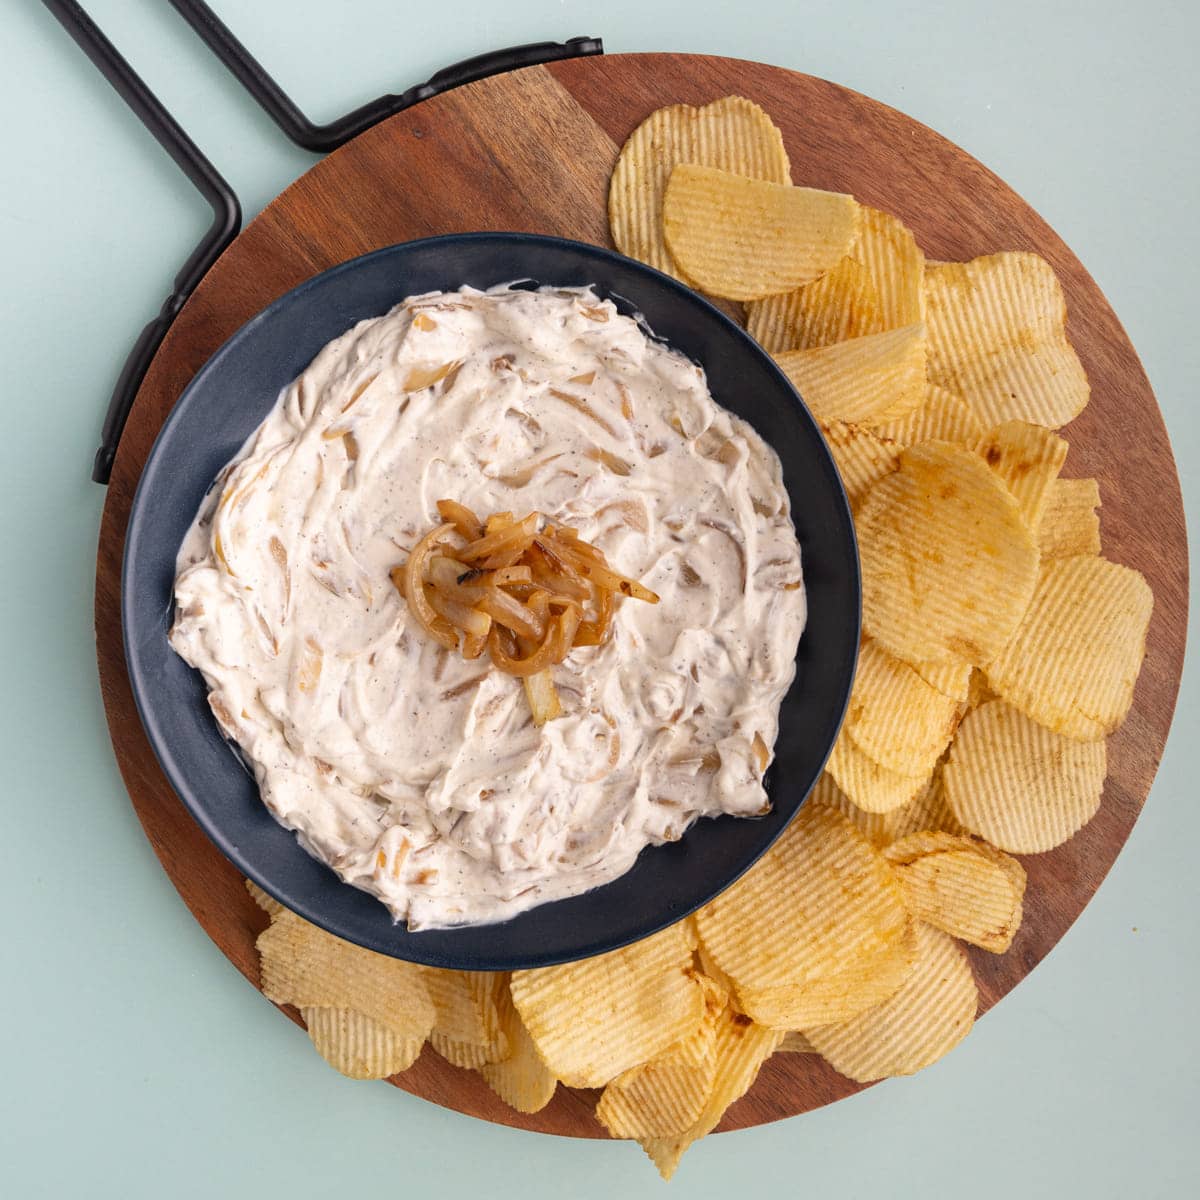 Caramelized Onon Dip served with ridged potato chips